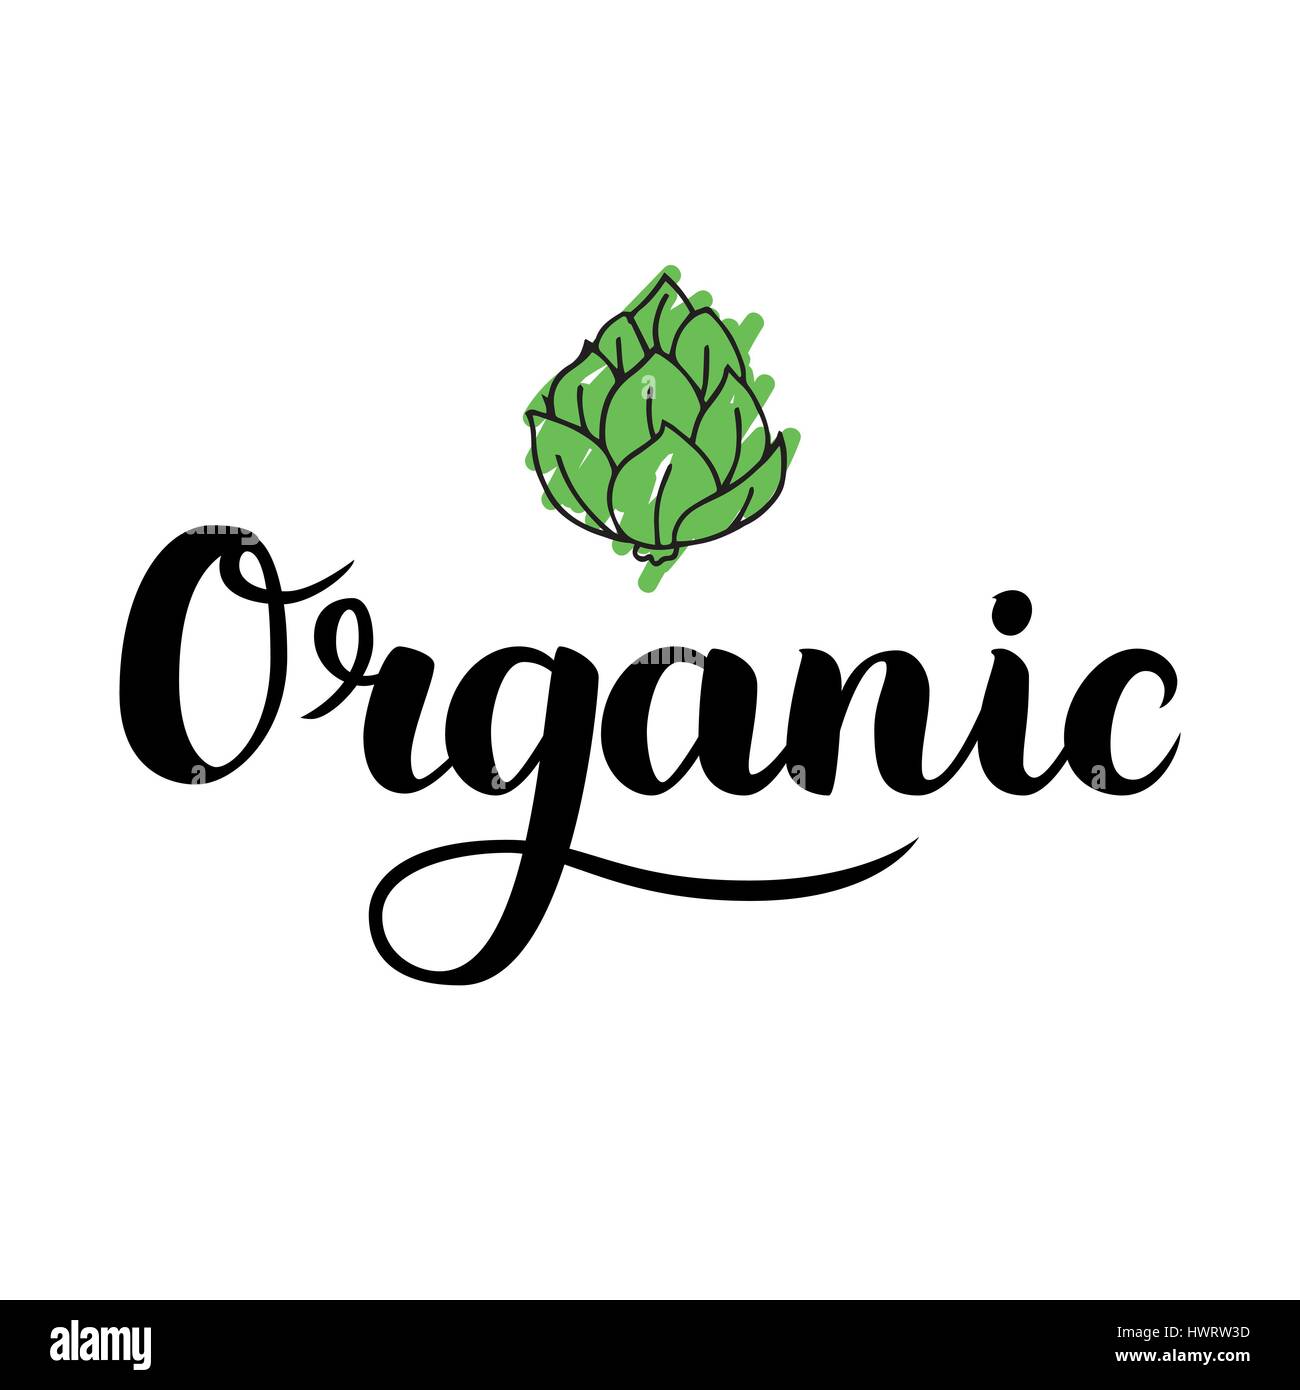 Organic brush lettering. Hand drawn word organic with green artichoke. Label, logo template for organic products, healthy food markets. Vector illustration Stock Vector